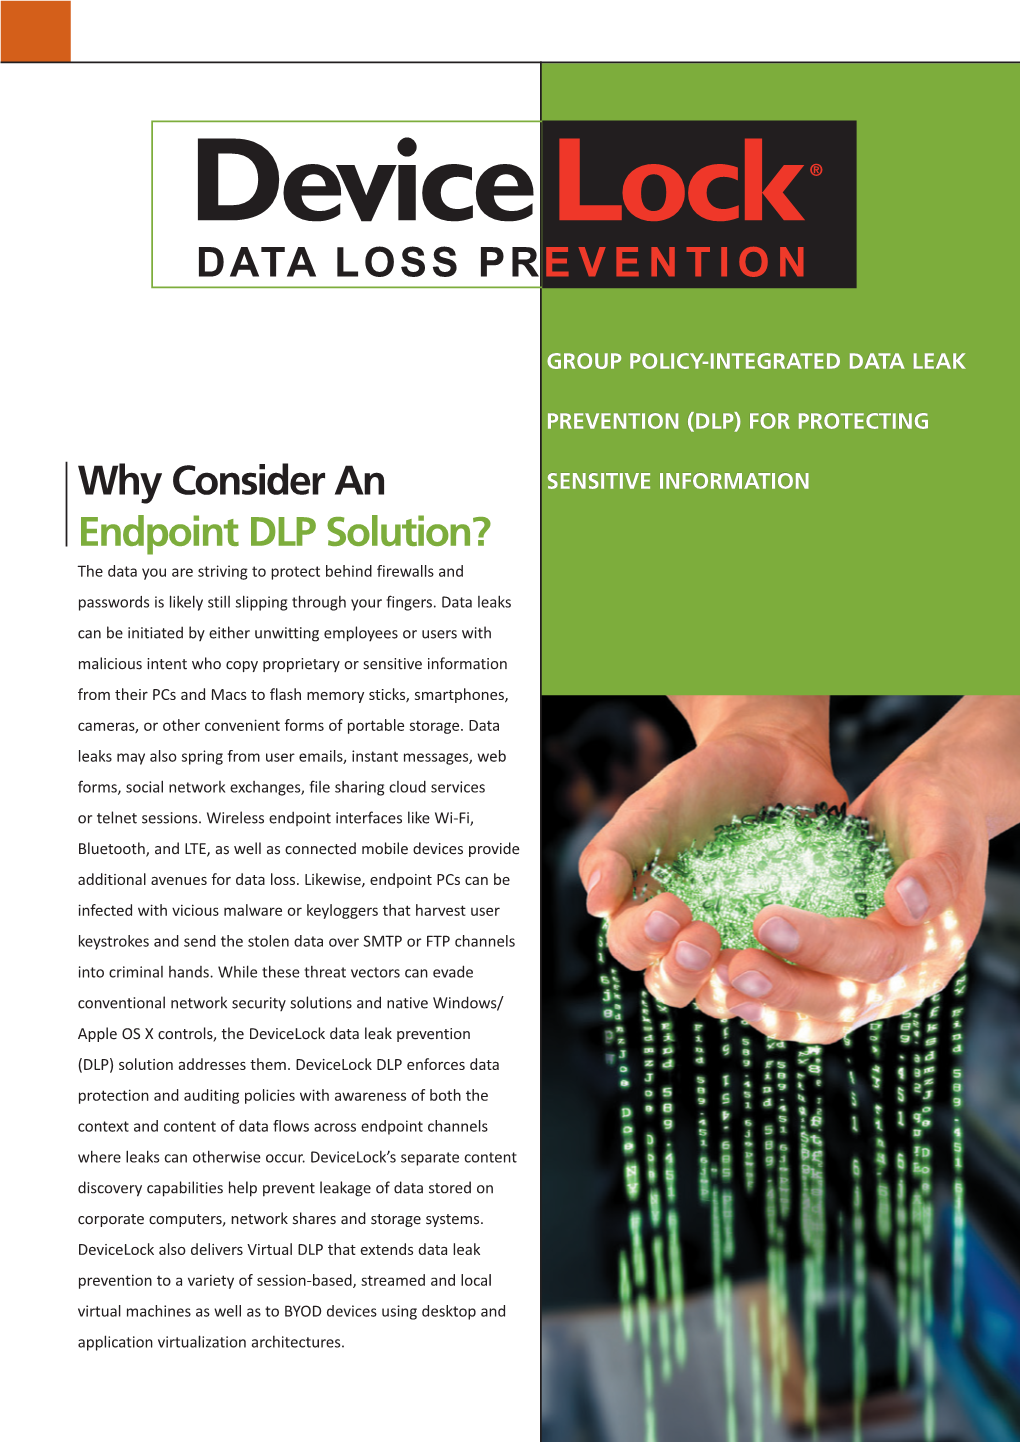 Why Consider an Endpoint DLP Solution? DATA LOSS PREVENTION